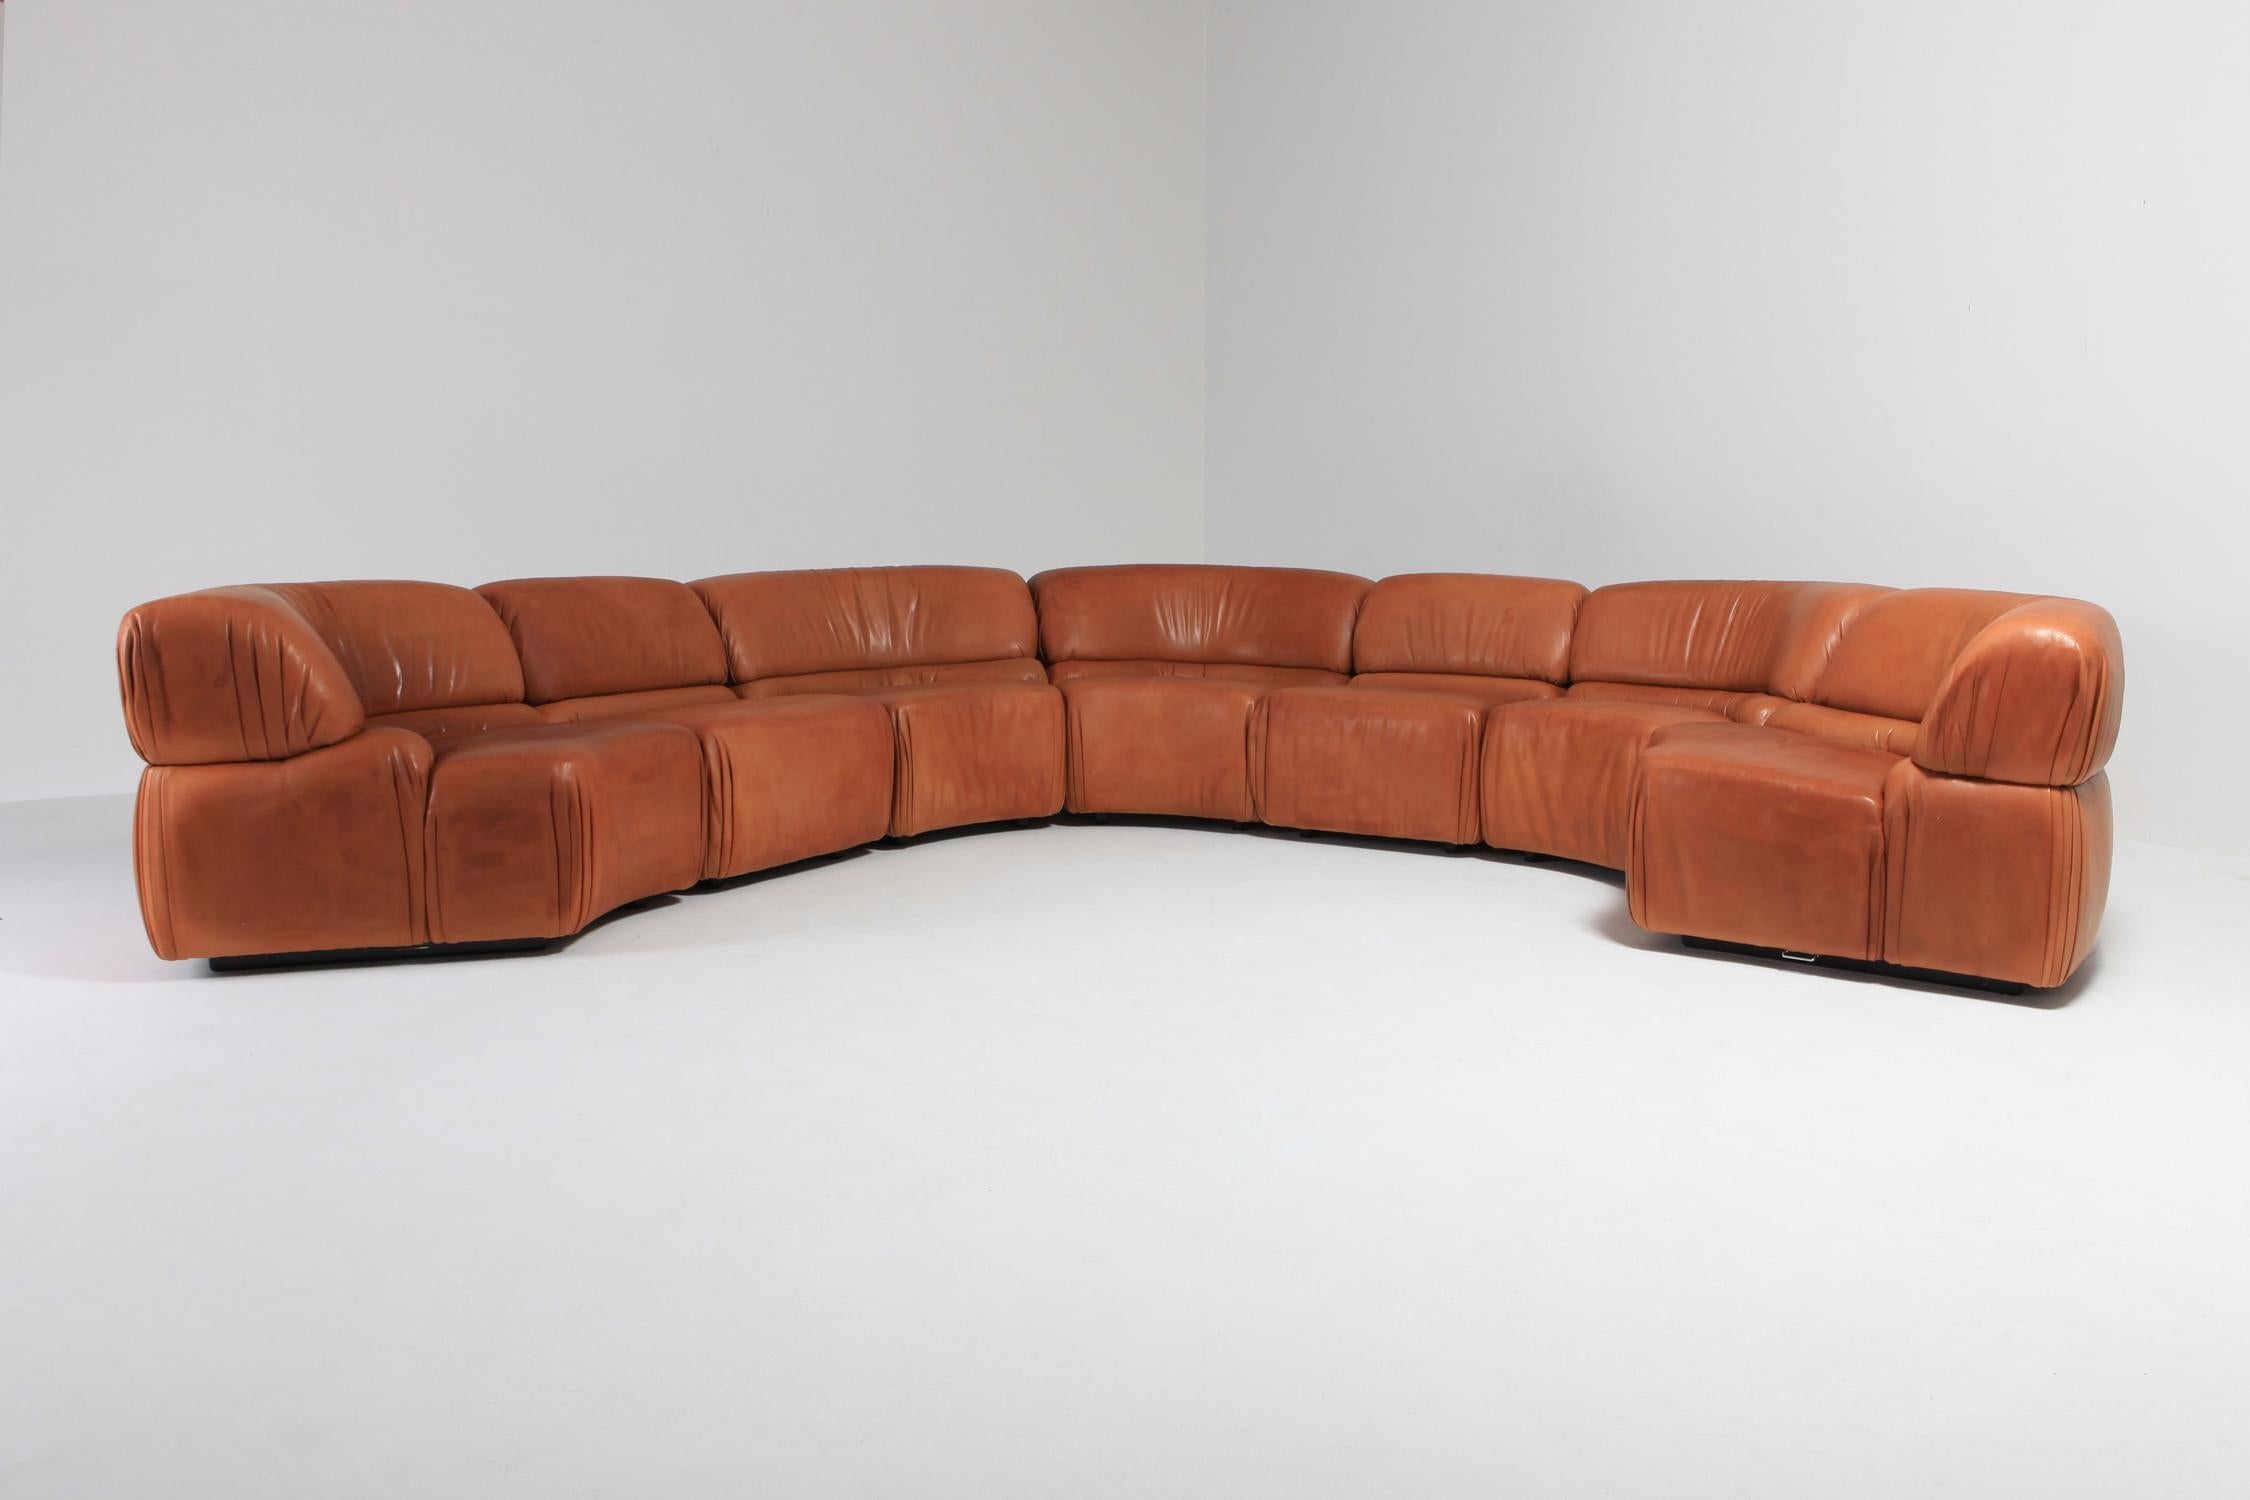 Mid-Century Modern Sectional Cognac Leather Sofa 'Cosmos' by De Sede, Switzerland